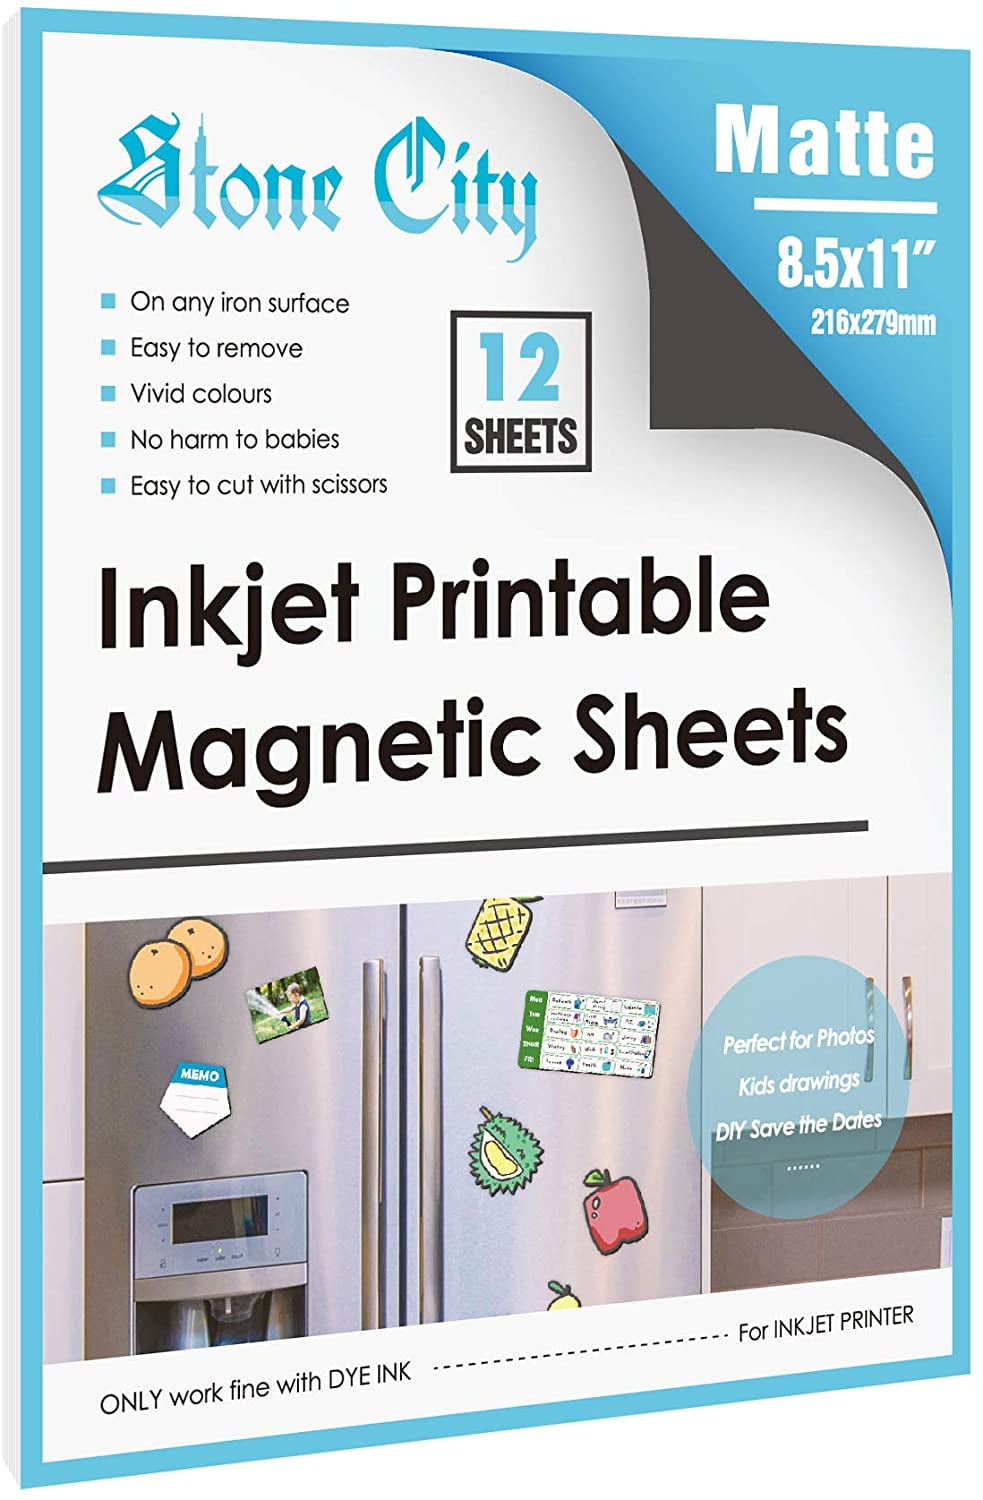 Printable Magnetic Sheets: Multisystem Technology